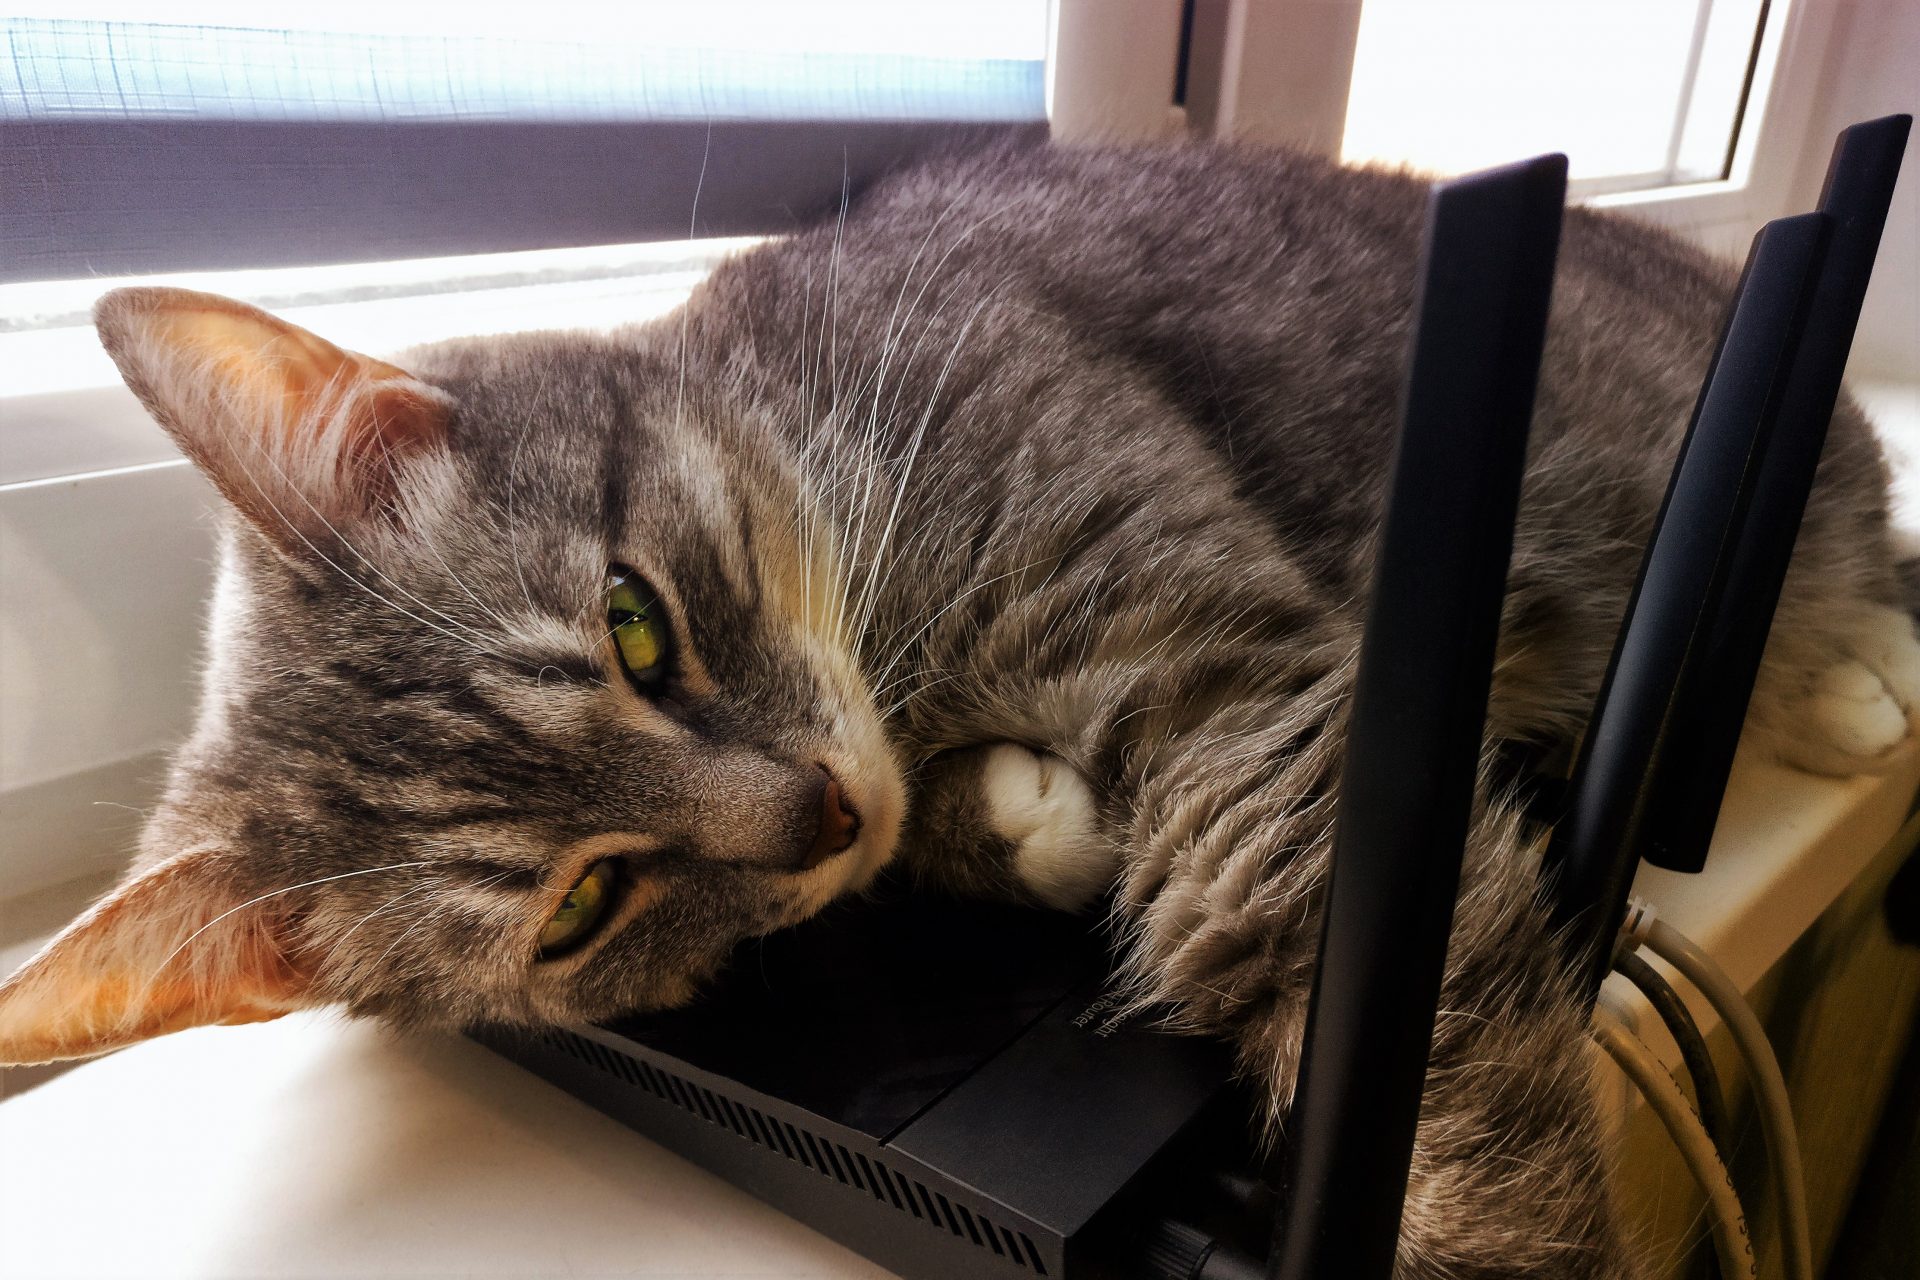 Tabby cat lying on a Wi-Fi router